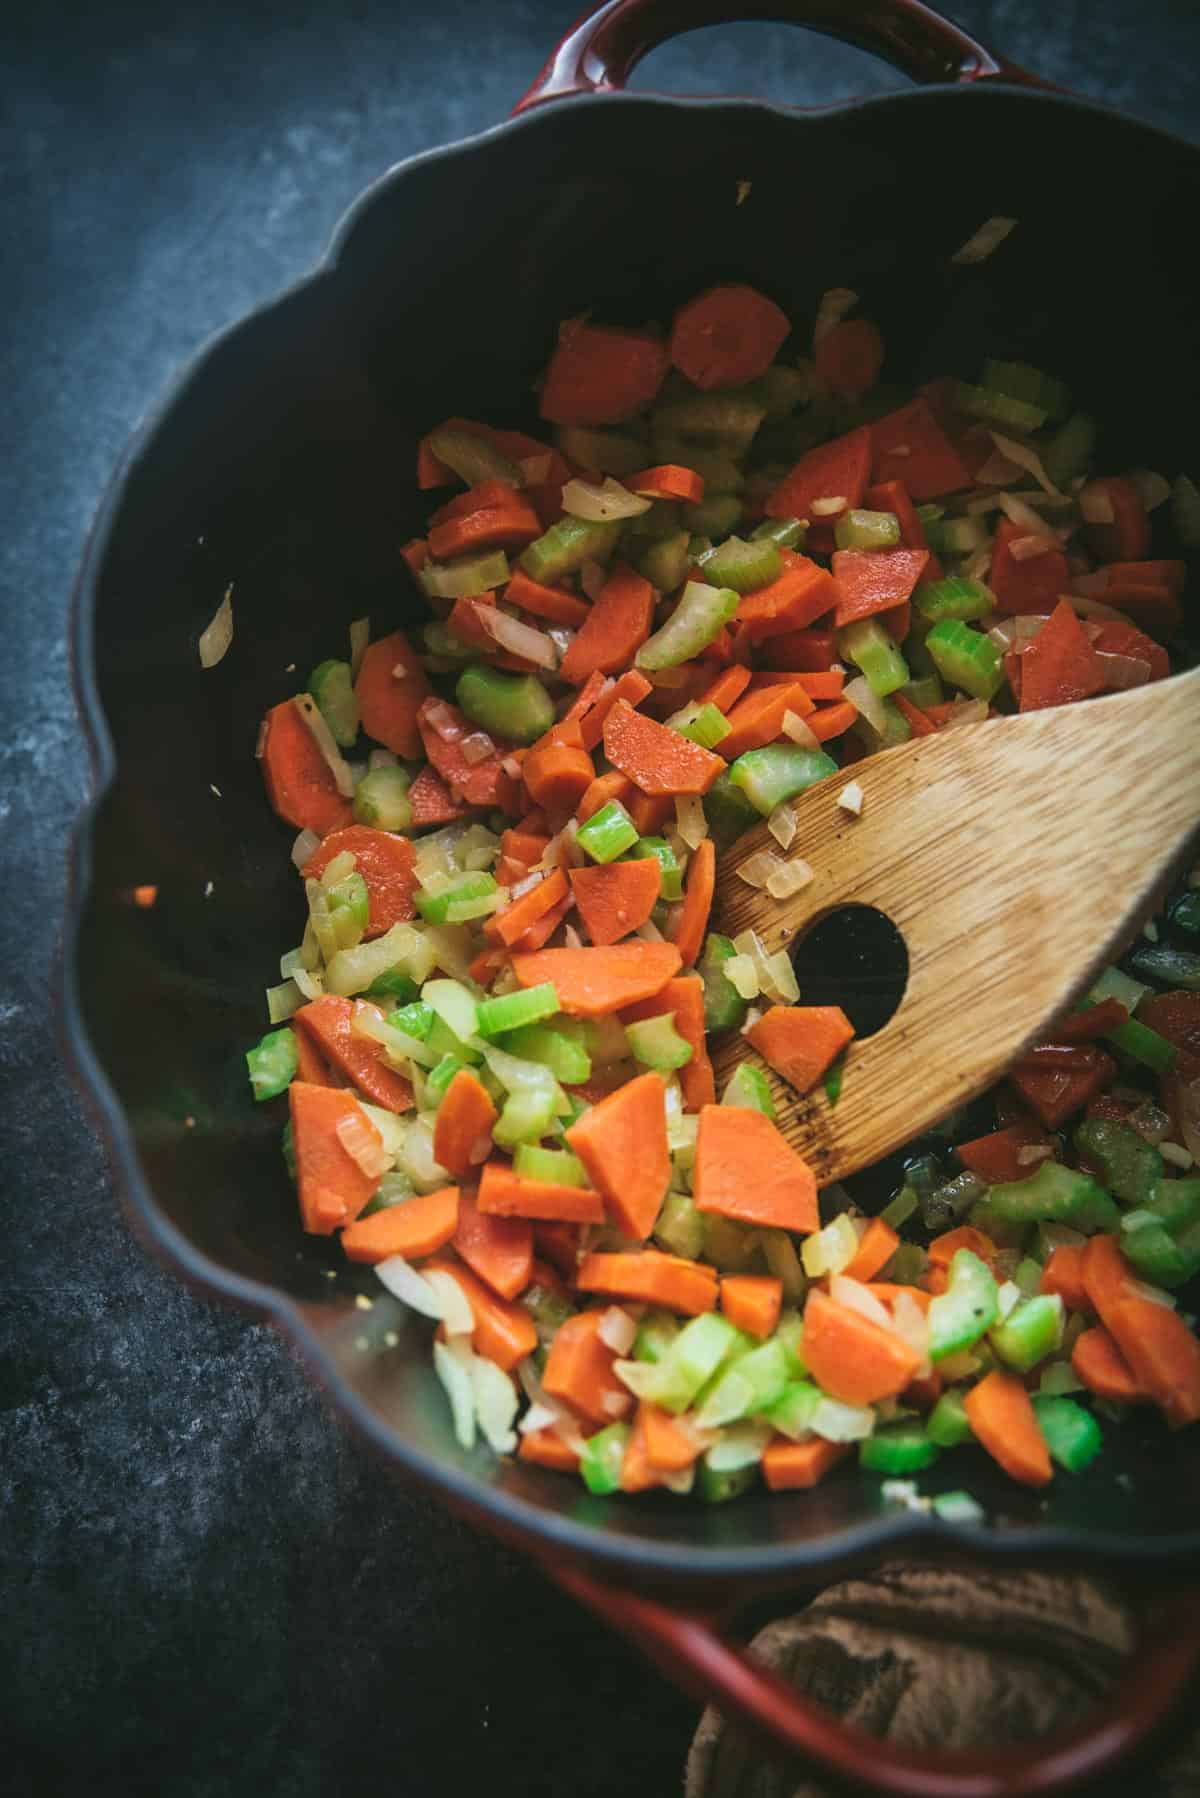 In a black skillet, carrots, celery, onion and garlic are being stirred with a wooden spoon.